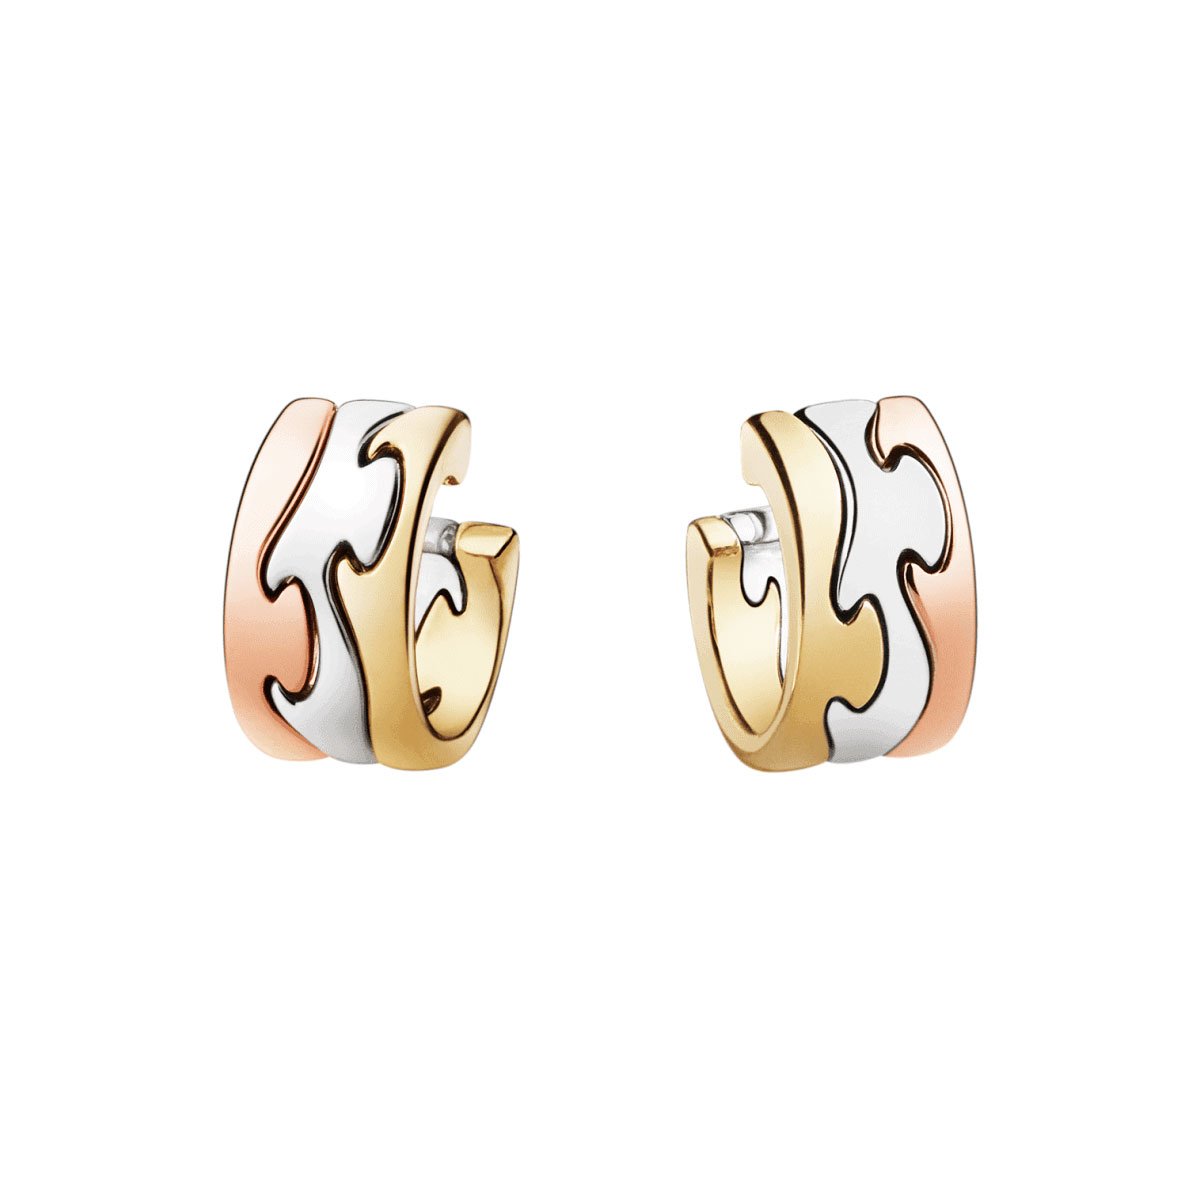 Fusion Yellow, White & Rose Gold Earrings